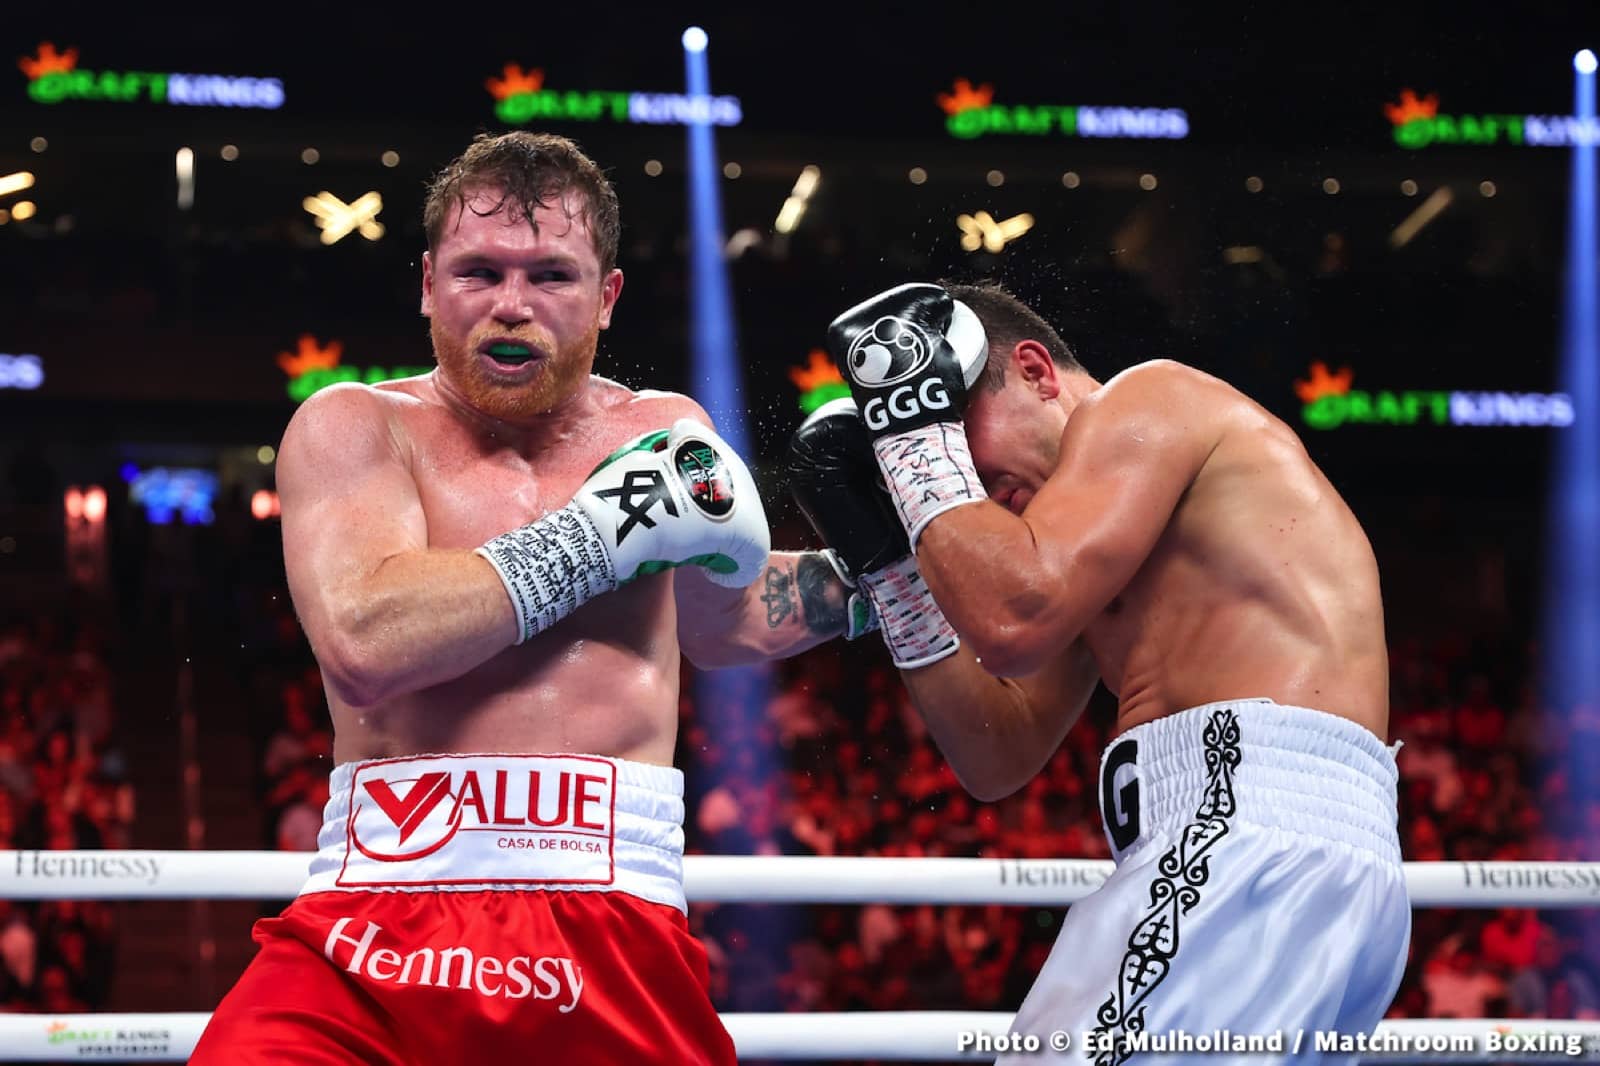 Canelo Alvarez's cast removed on surgically repaired left hand